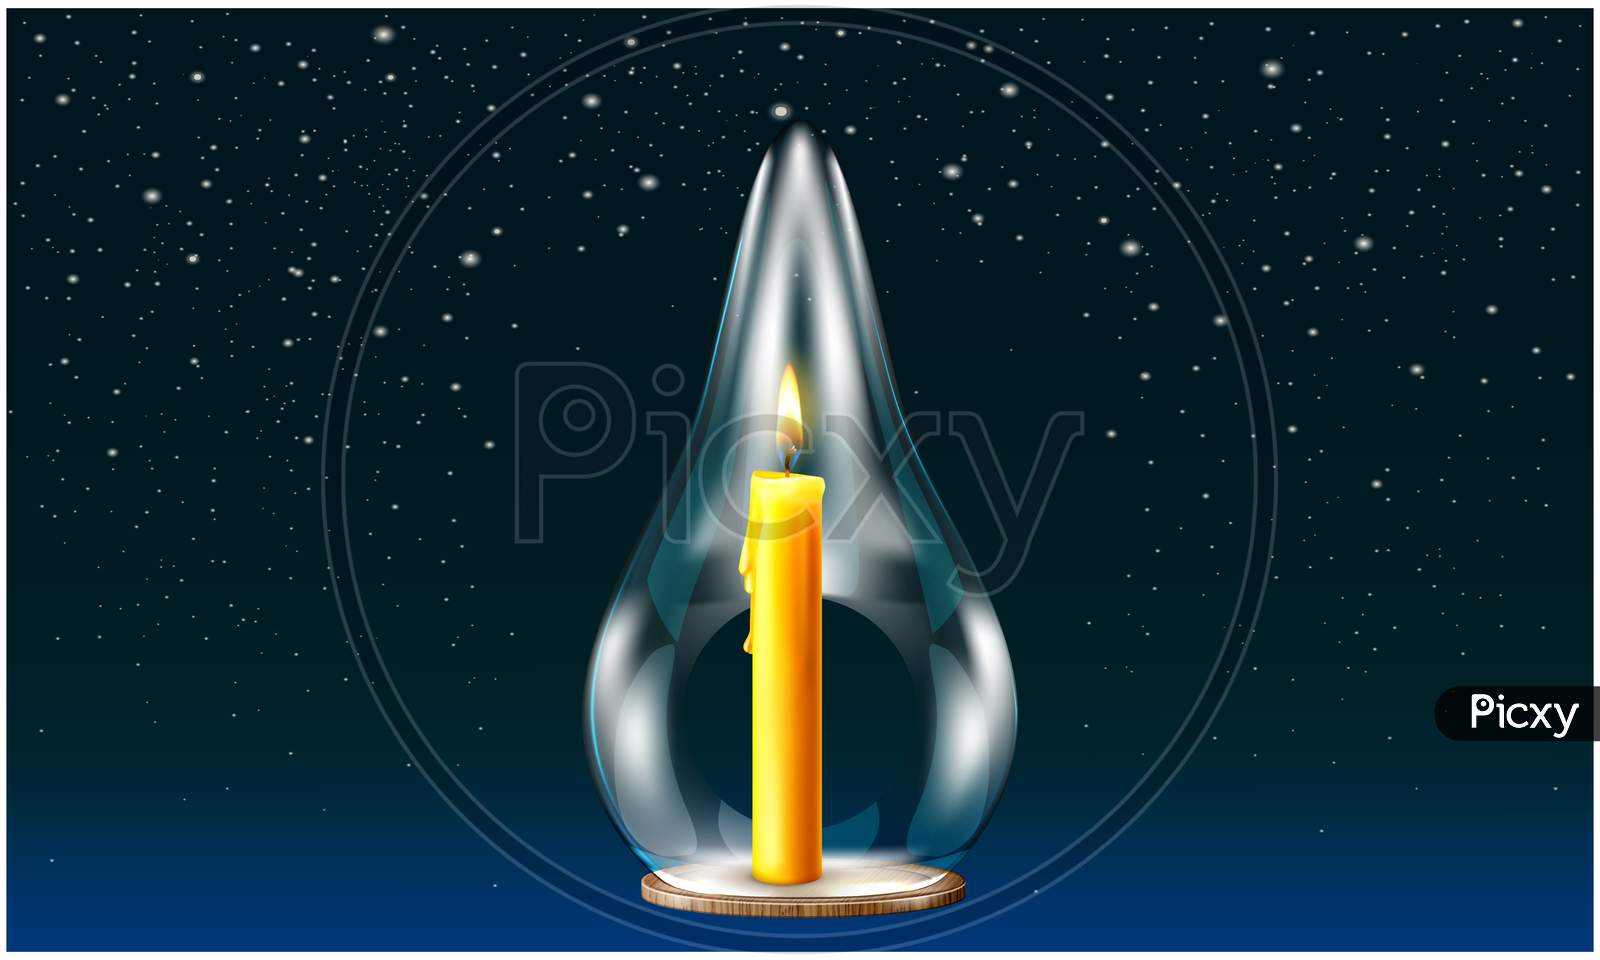 Burning Candle In The Glass On Abstract Dark Background